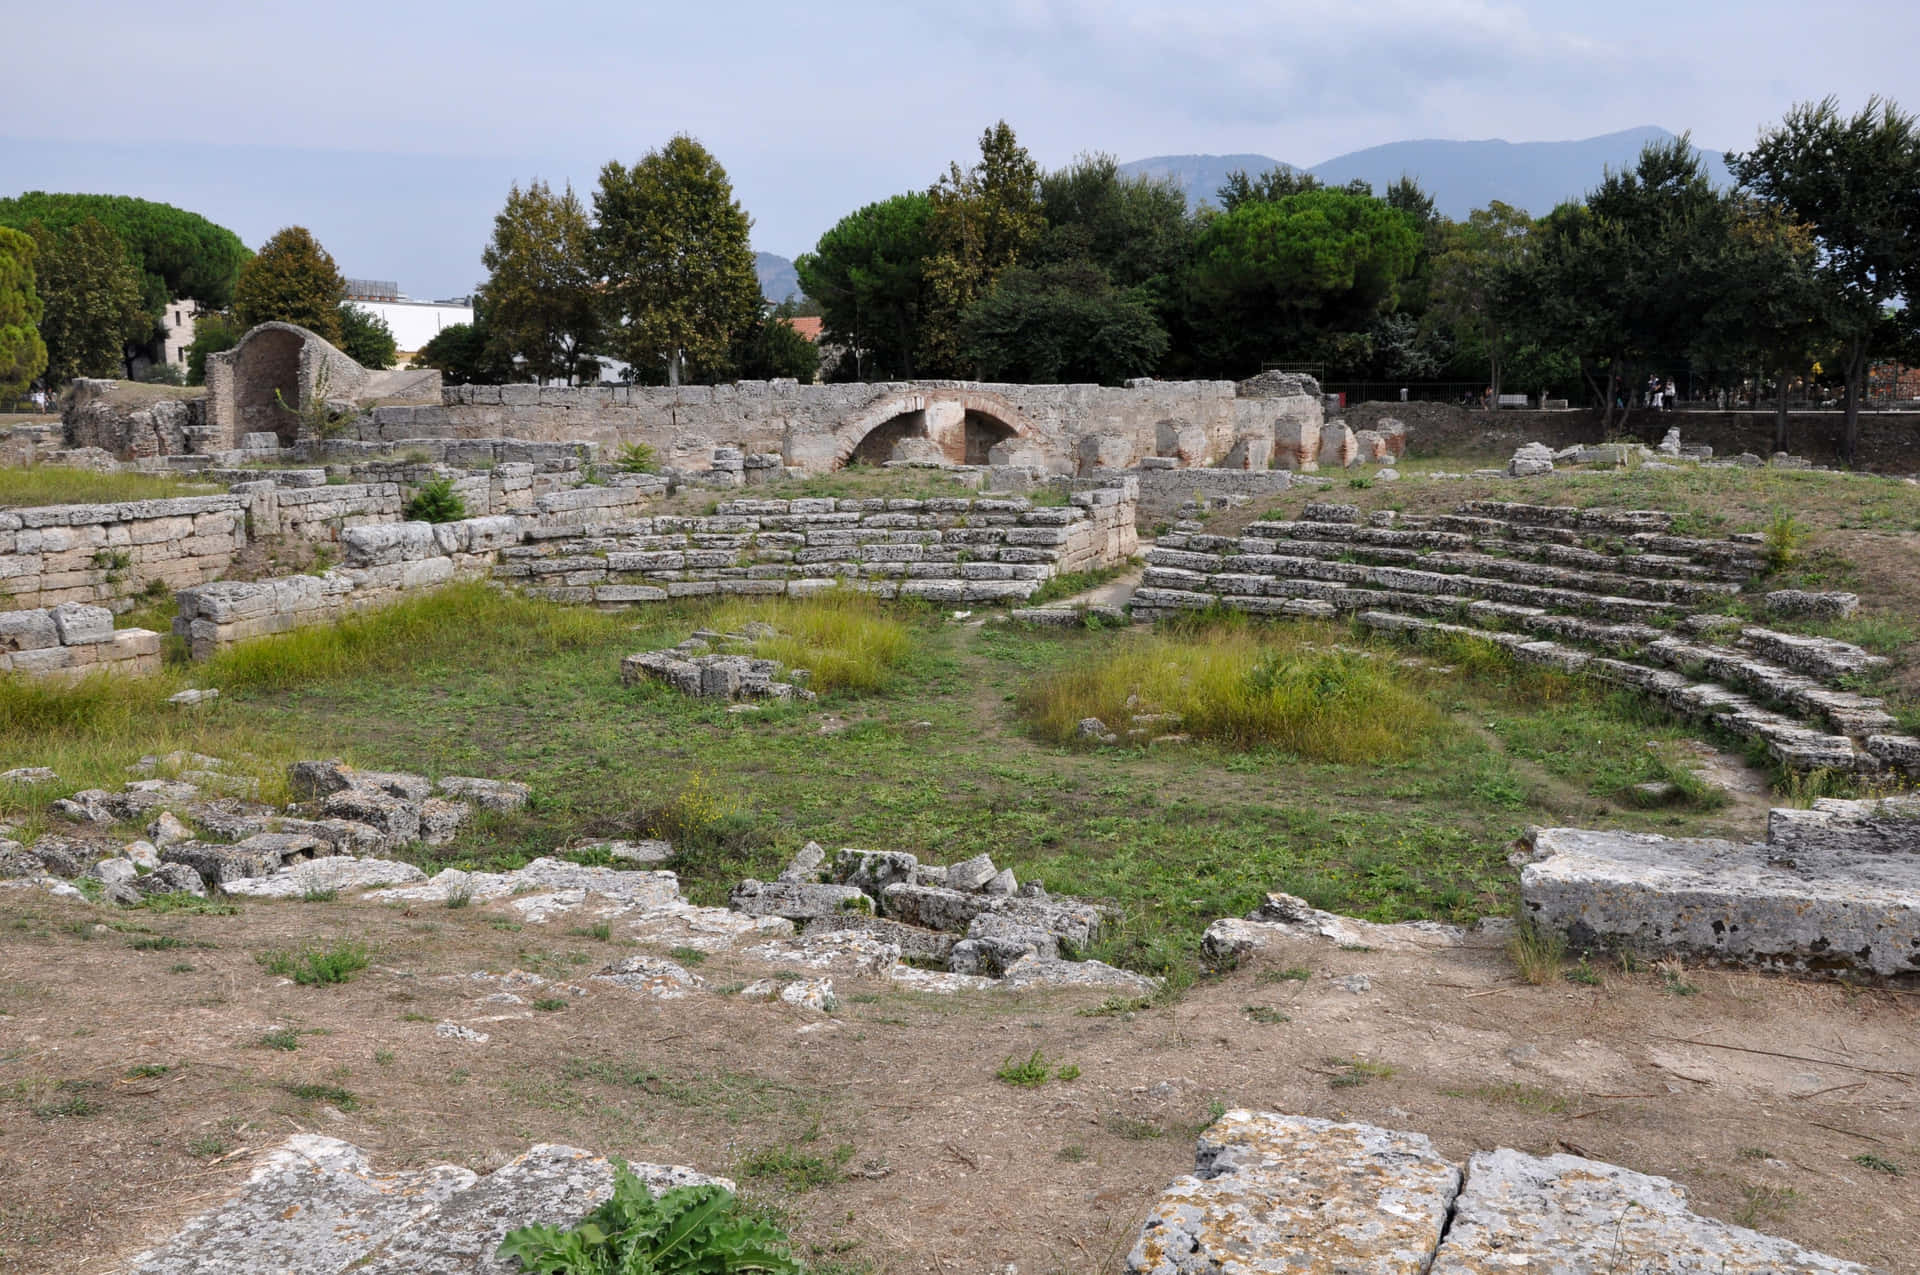 Paestumtheatron Is Already An Italian Word And It Refers To The Ancient Greek Theater Located In The Archaeological Site Of Paestum, In Southern Italy. Therefore, There Is No Need To Translate It Into Italian. Sfondo